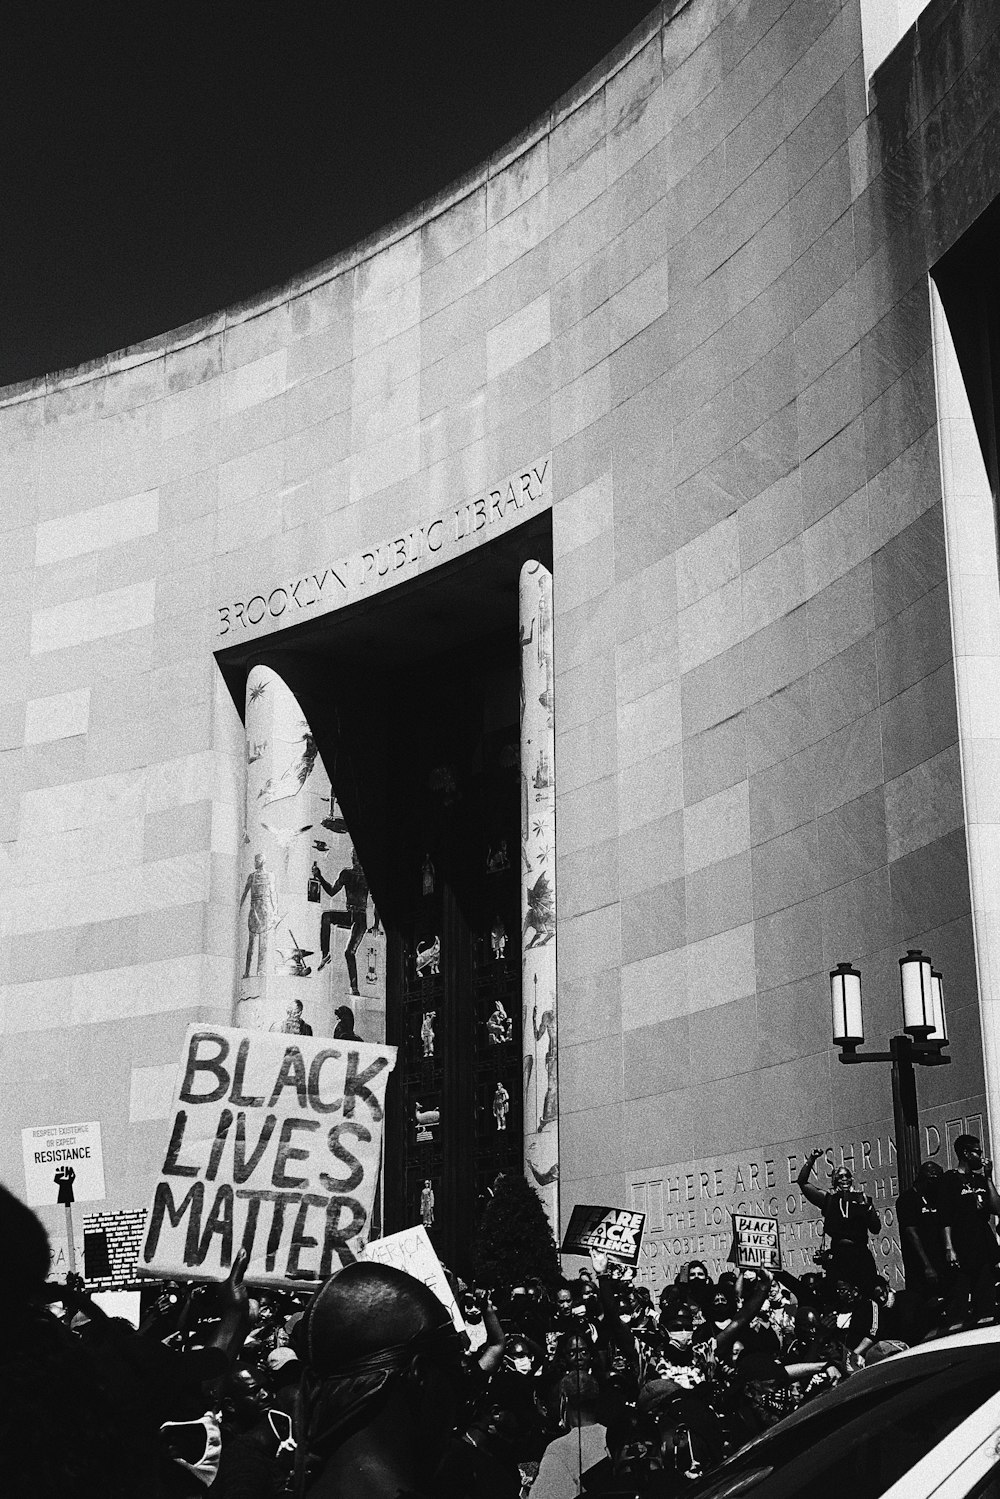 a black lives matter protest in front of a building